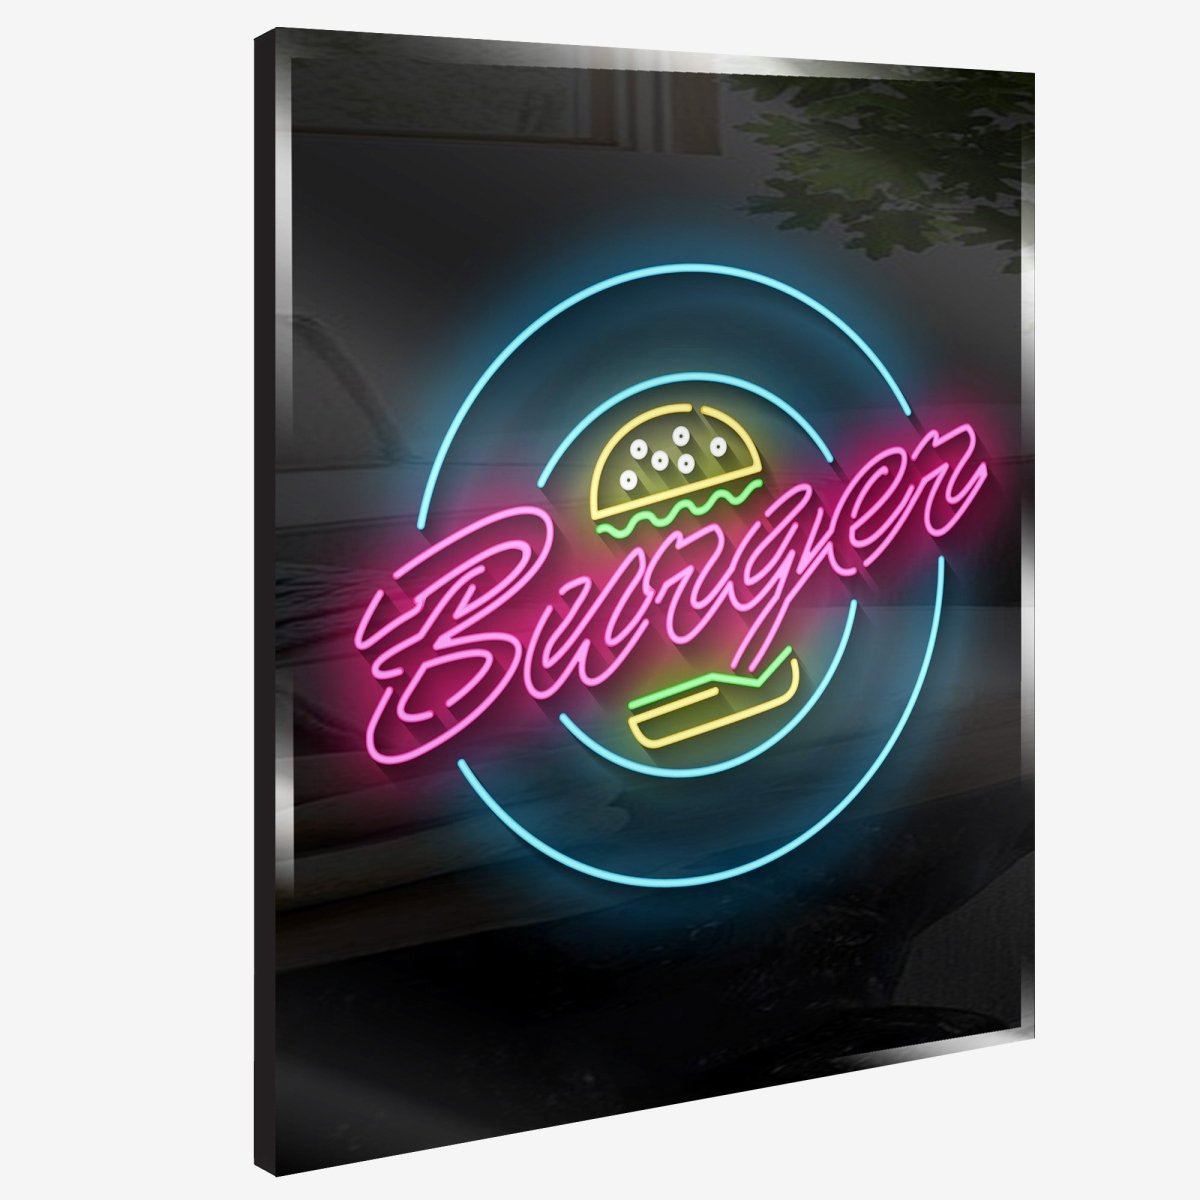 Personalized Neon Sign Burger - madaboutneon